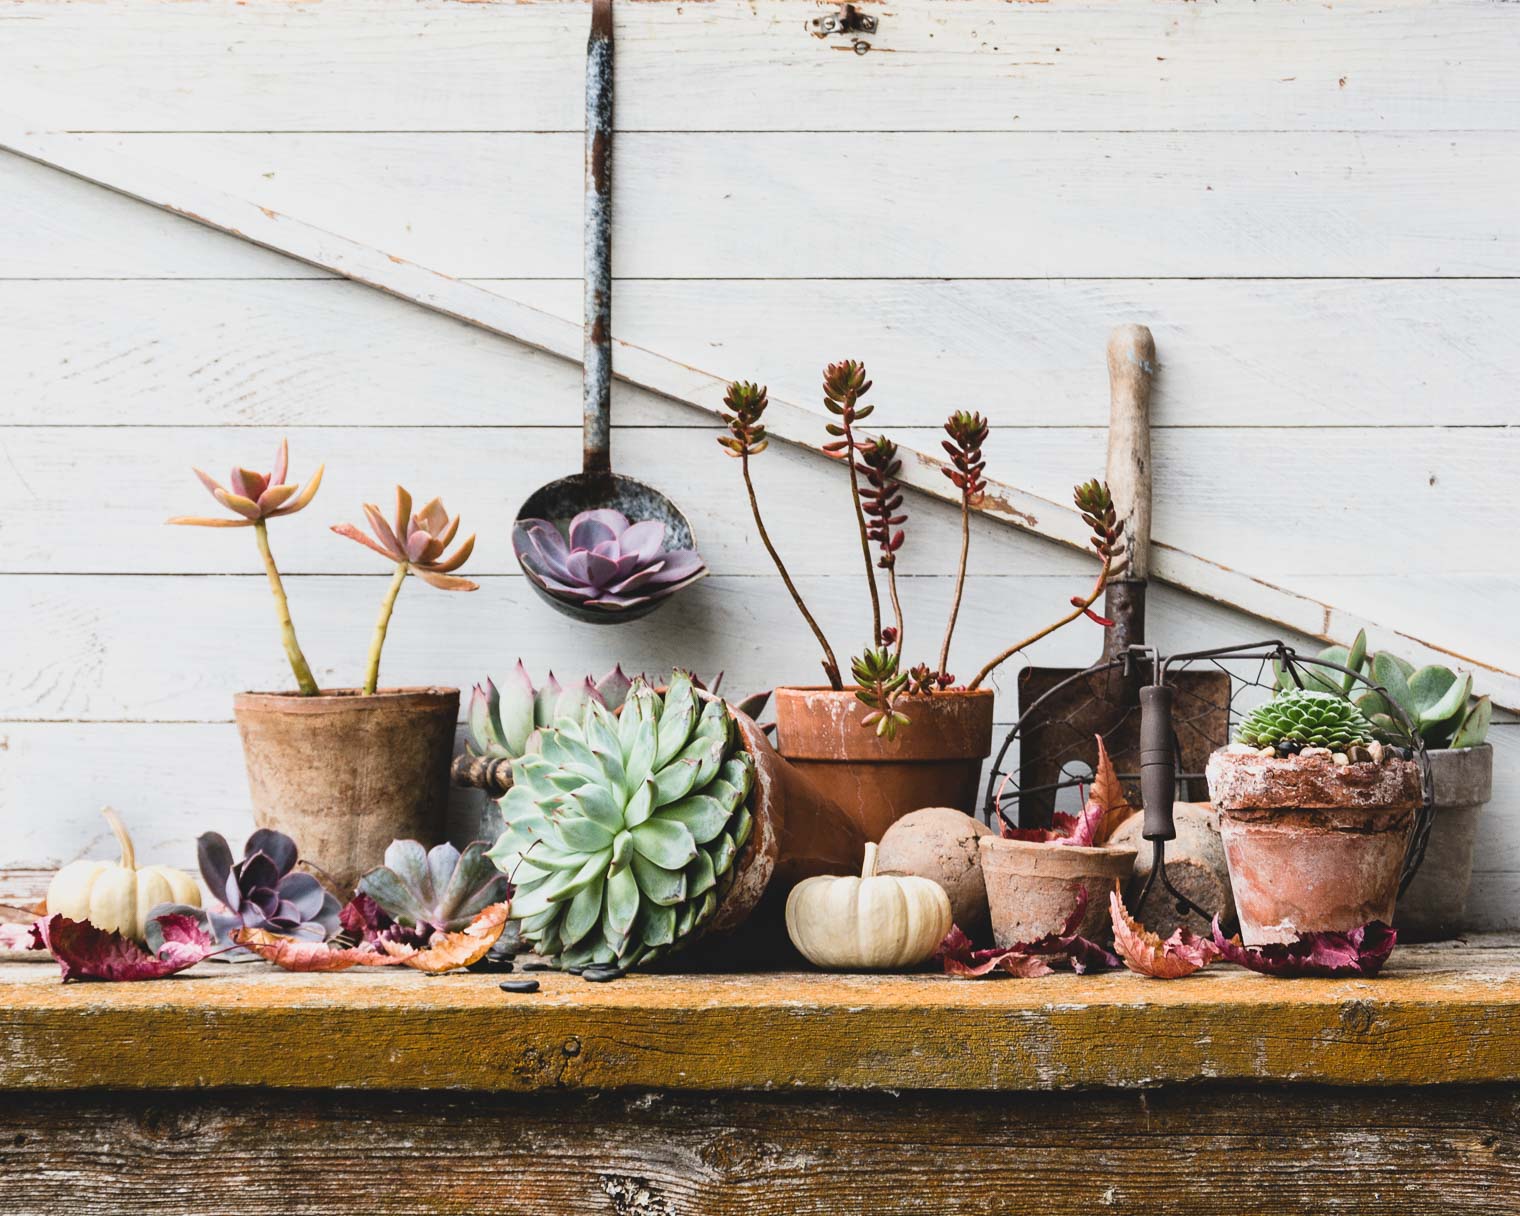 Succulent Parade, Barb Brookbank, Keeping With the Times